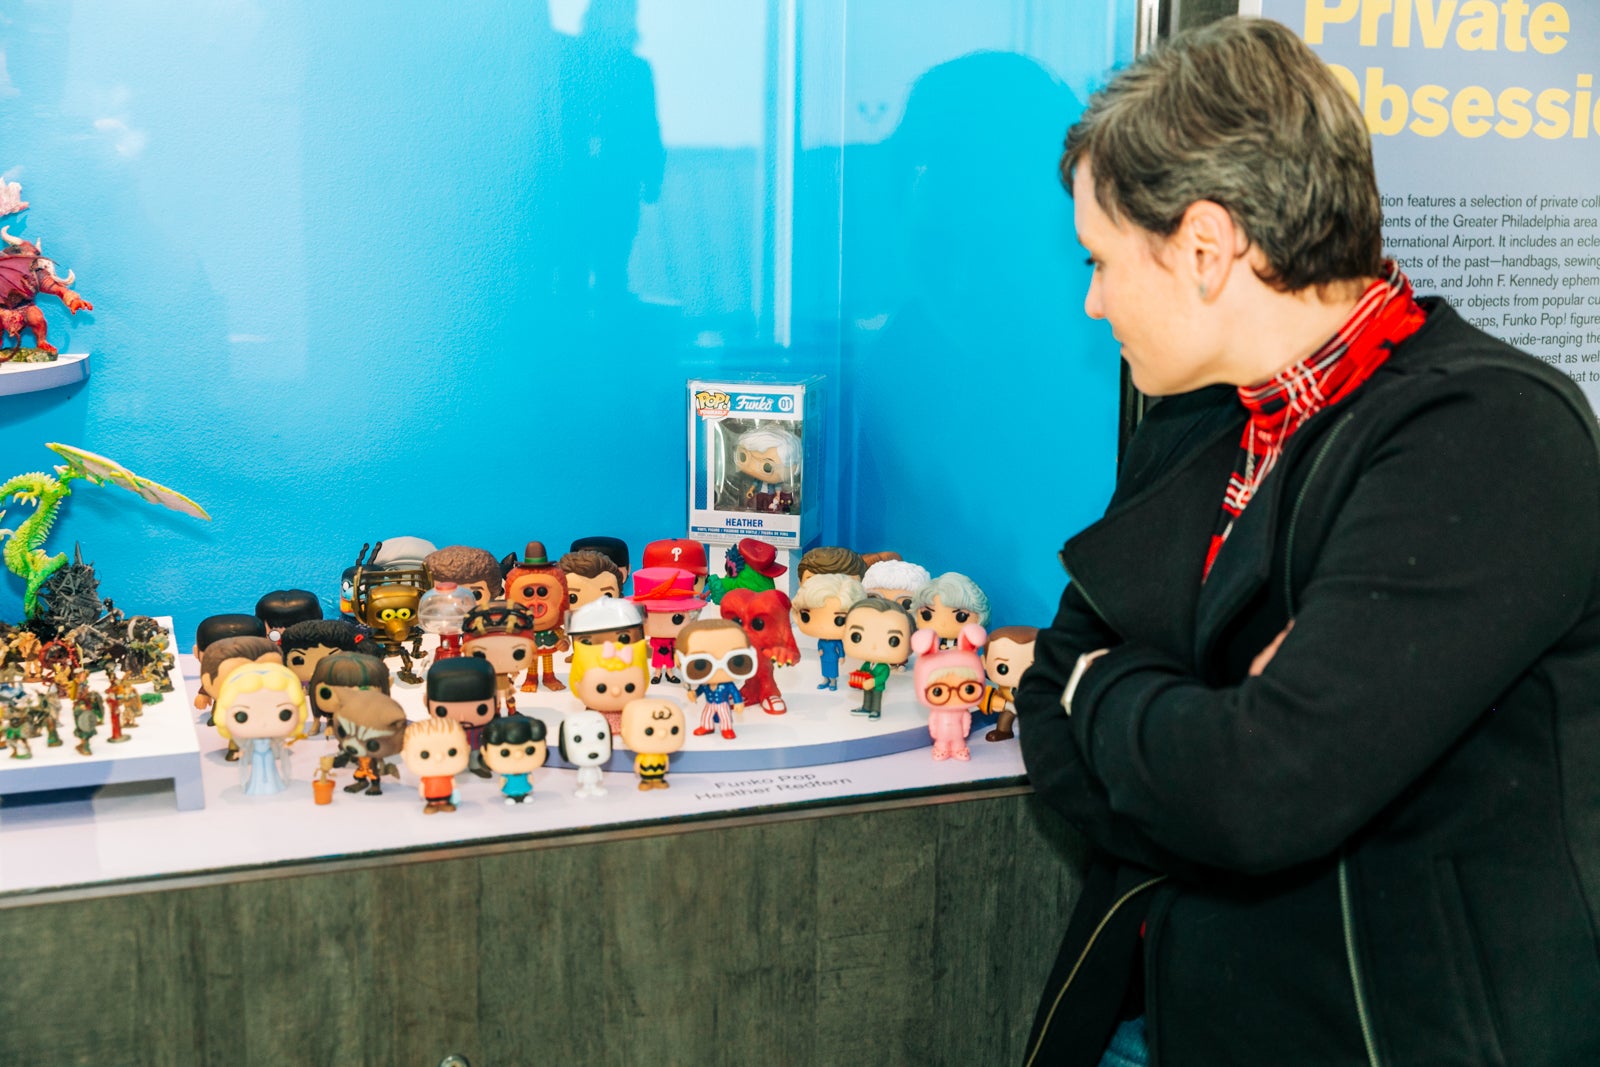 Heather Redfern with her Funko Pop collection.